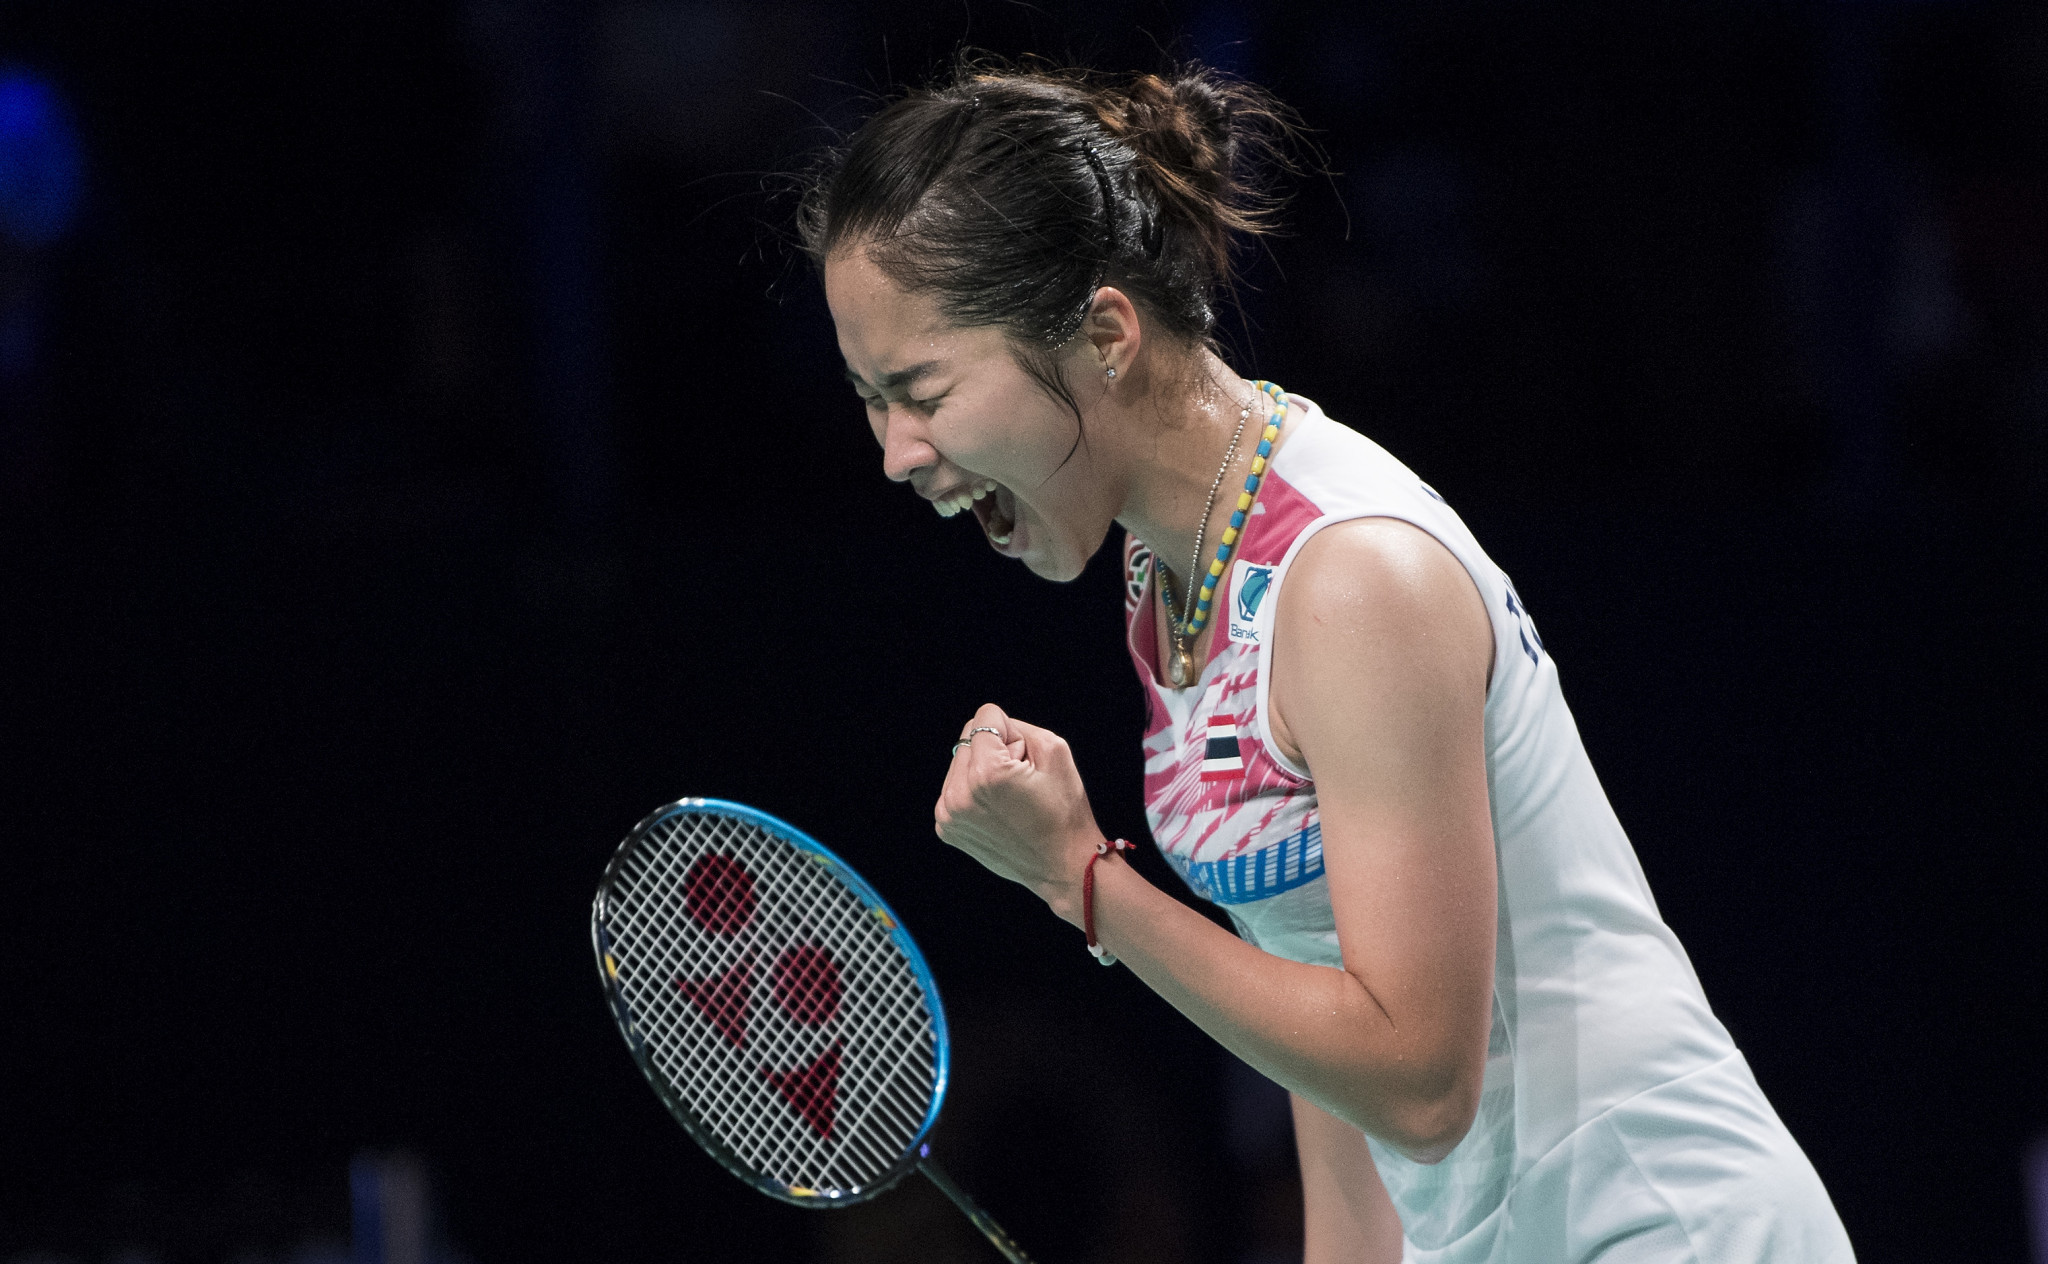 Ratchanok Intanon knocked out the top seed in the women's tournament ©Getty Images